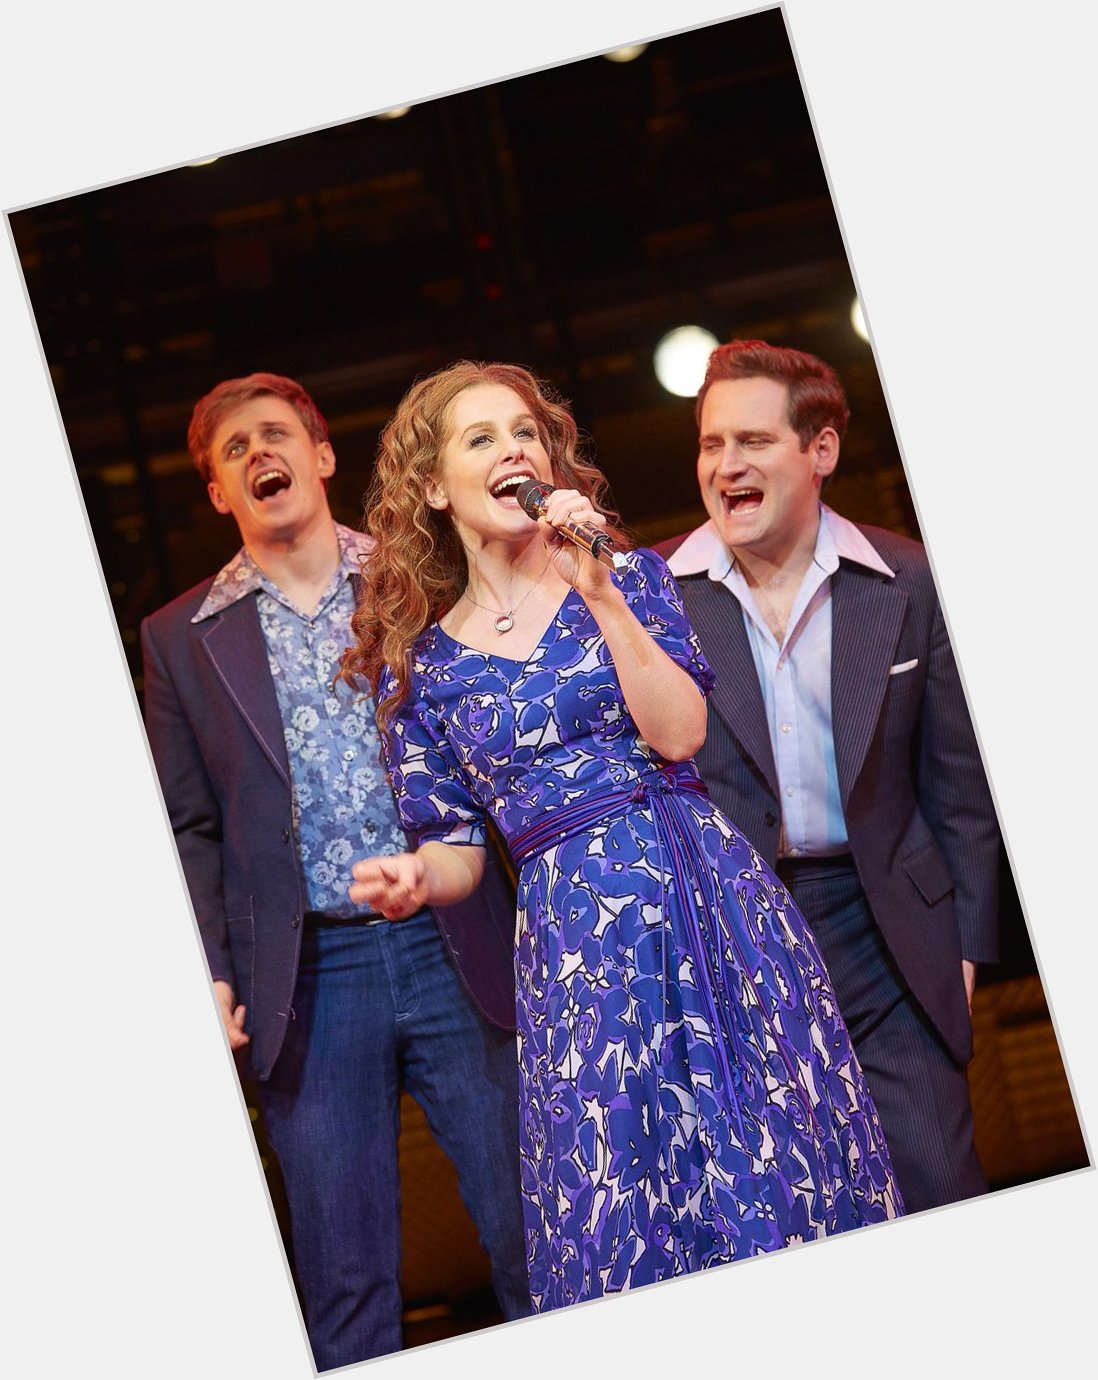 She s some kind of wonderful Happy Birthday Carole King!

Have you seen the musical yet? 